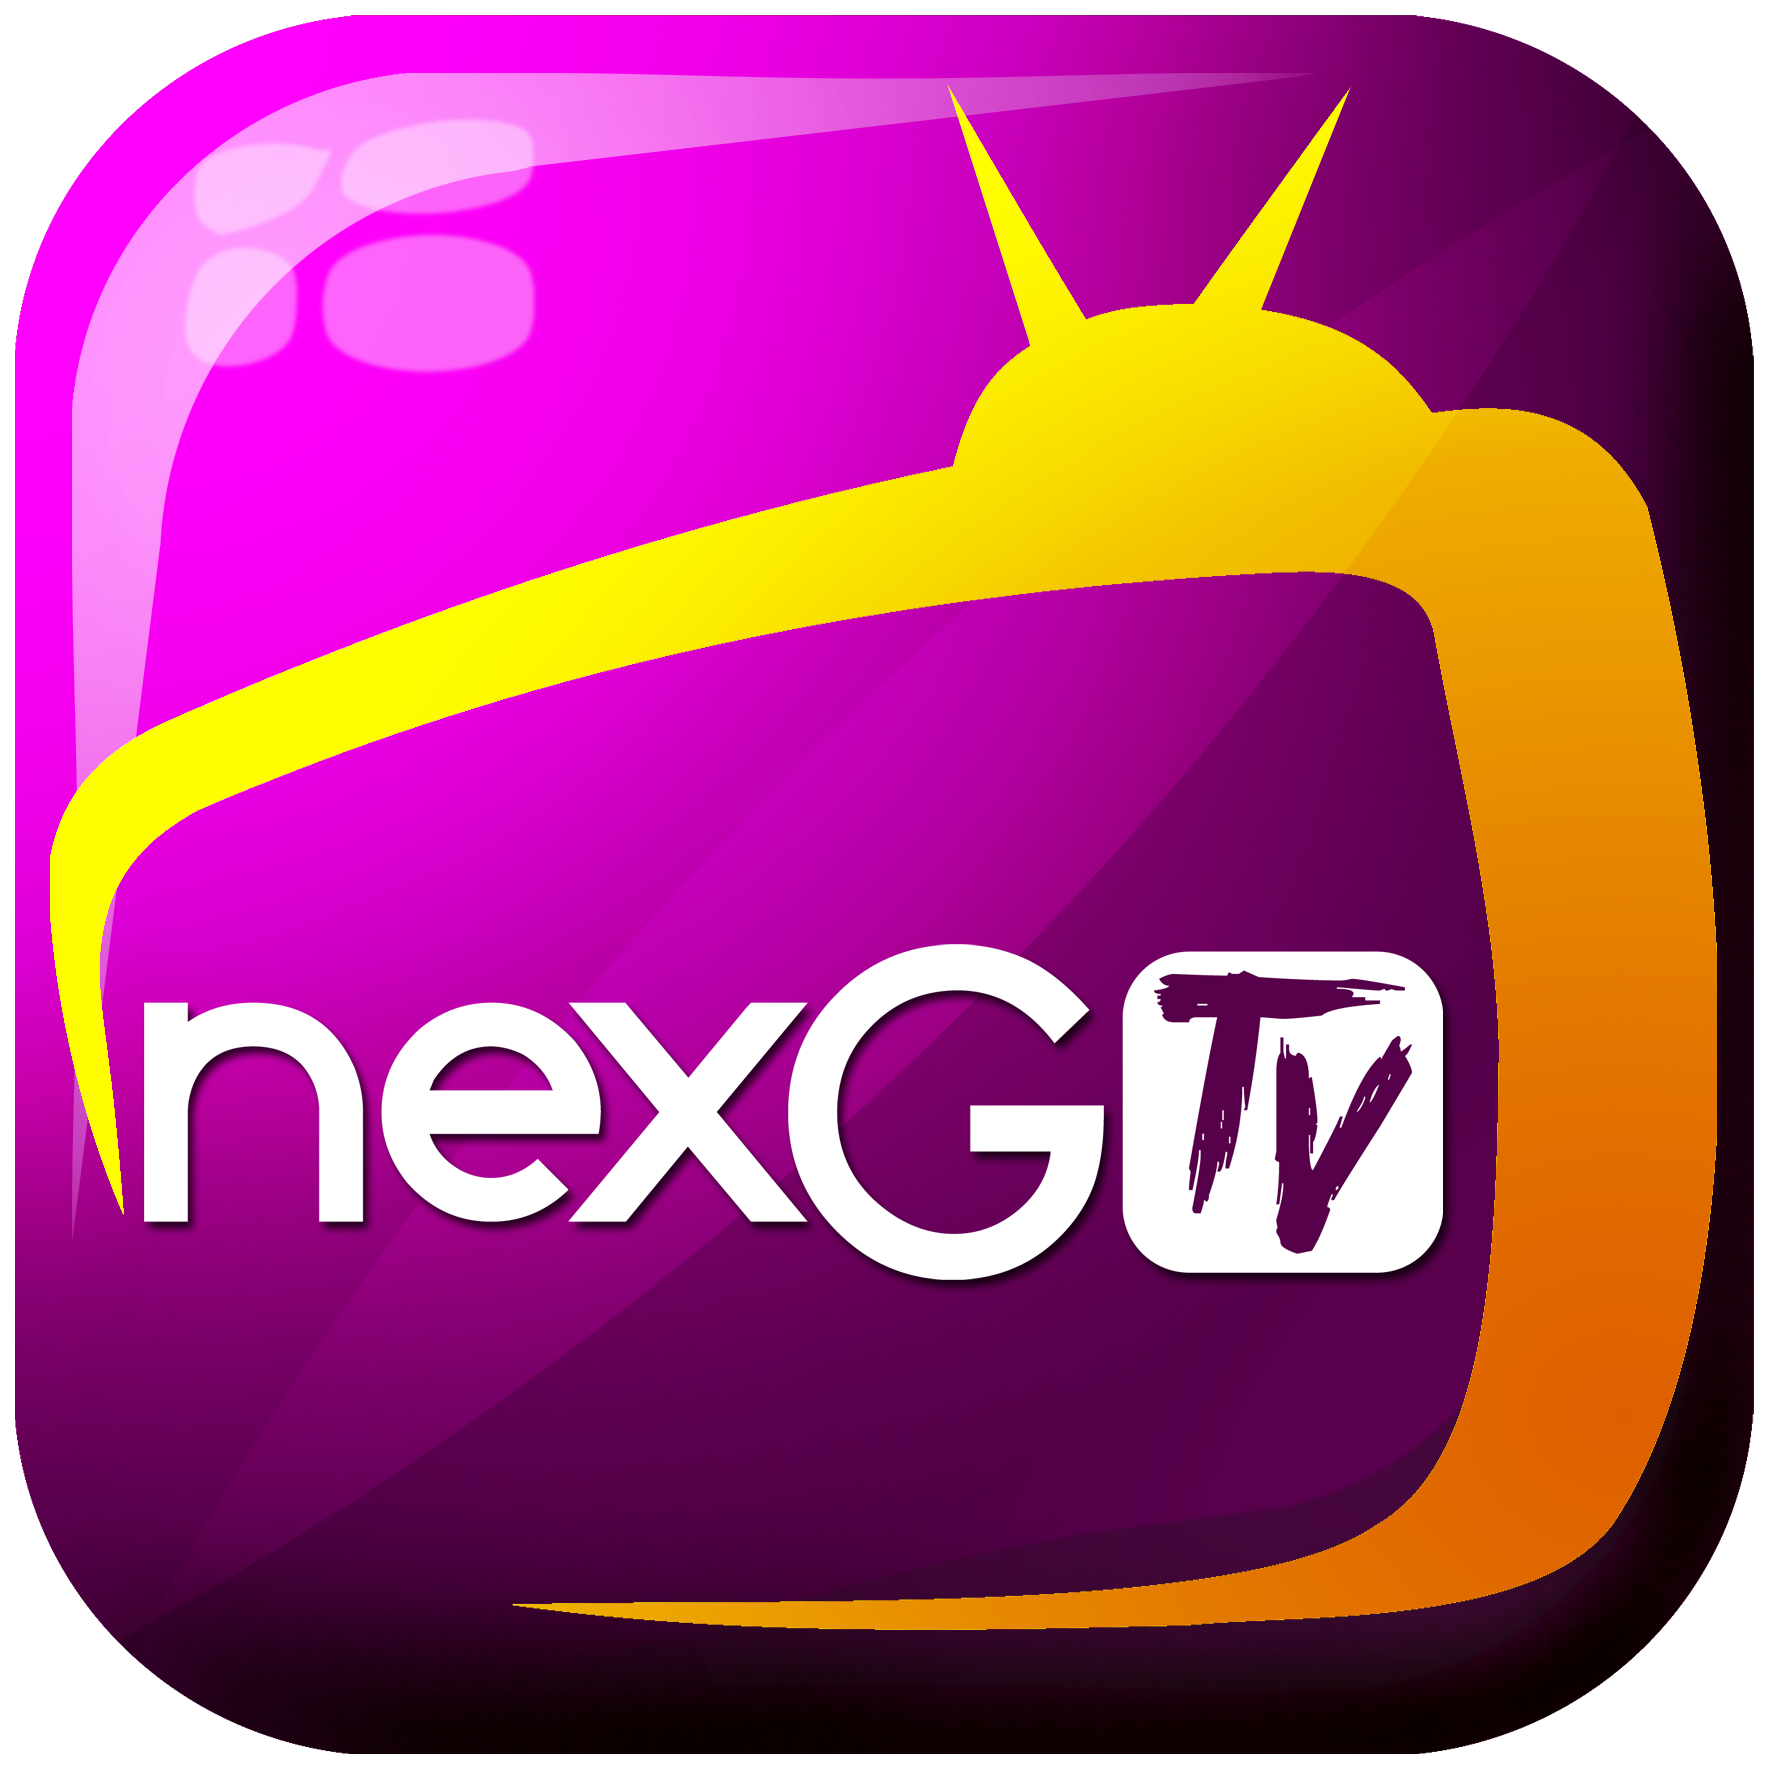 You are currently viewing nexGTv strengthens its international presence by integrating operator billing in UAE, Sri Lanka,  and  Qatar market.